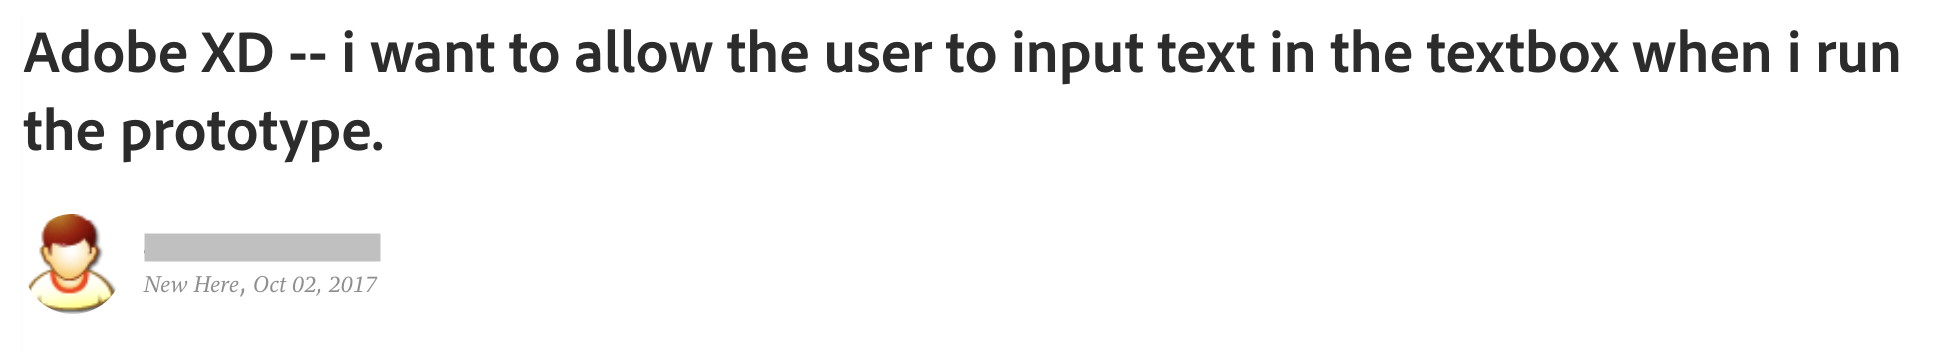 Comment from a forum: I want to allow the user to input text in the textbox when I run the prototype.